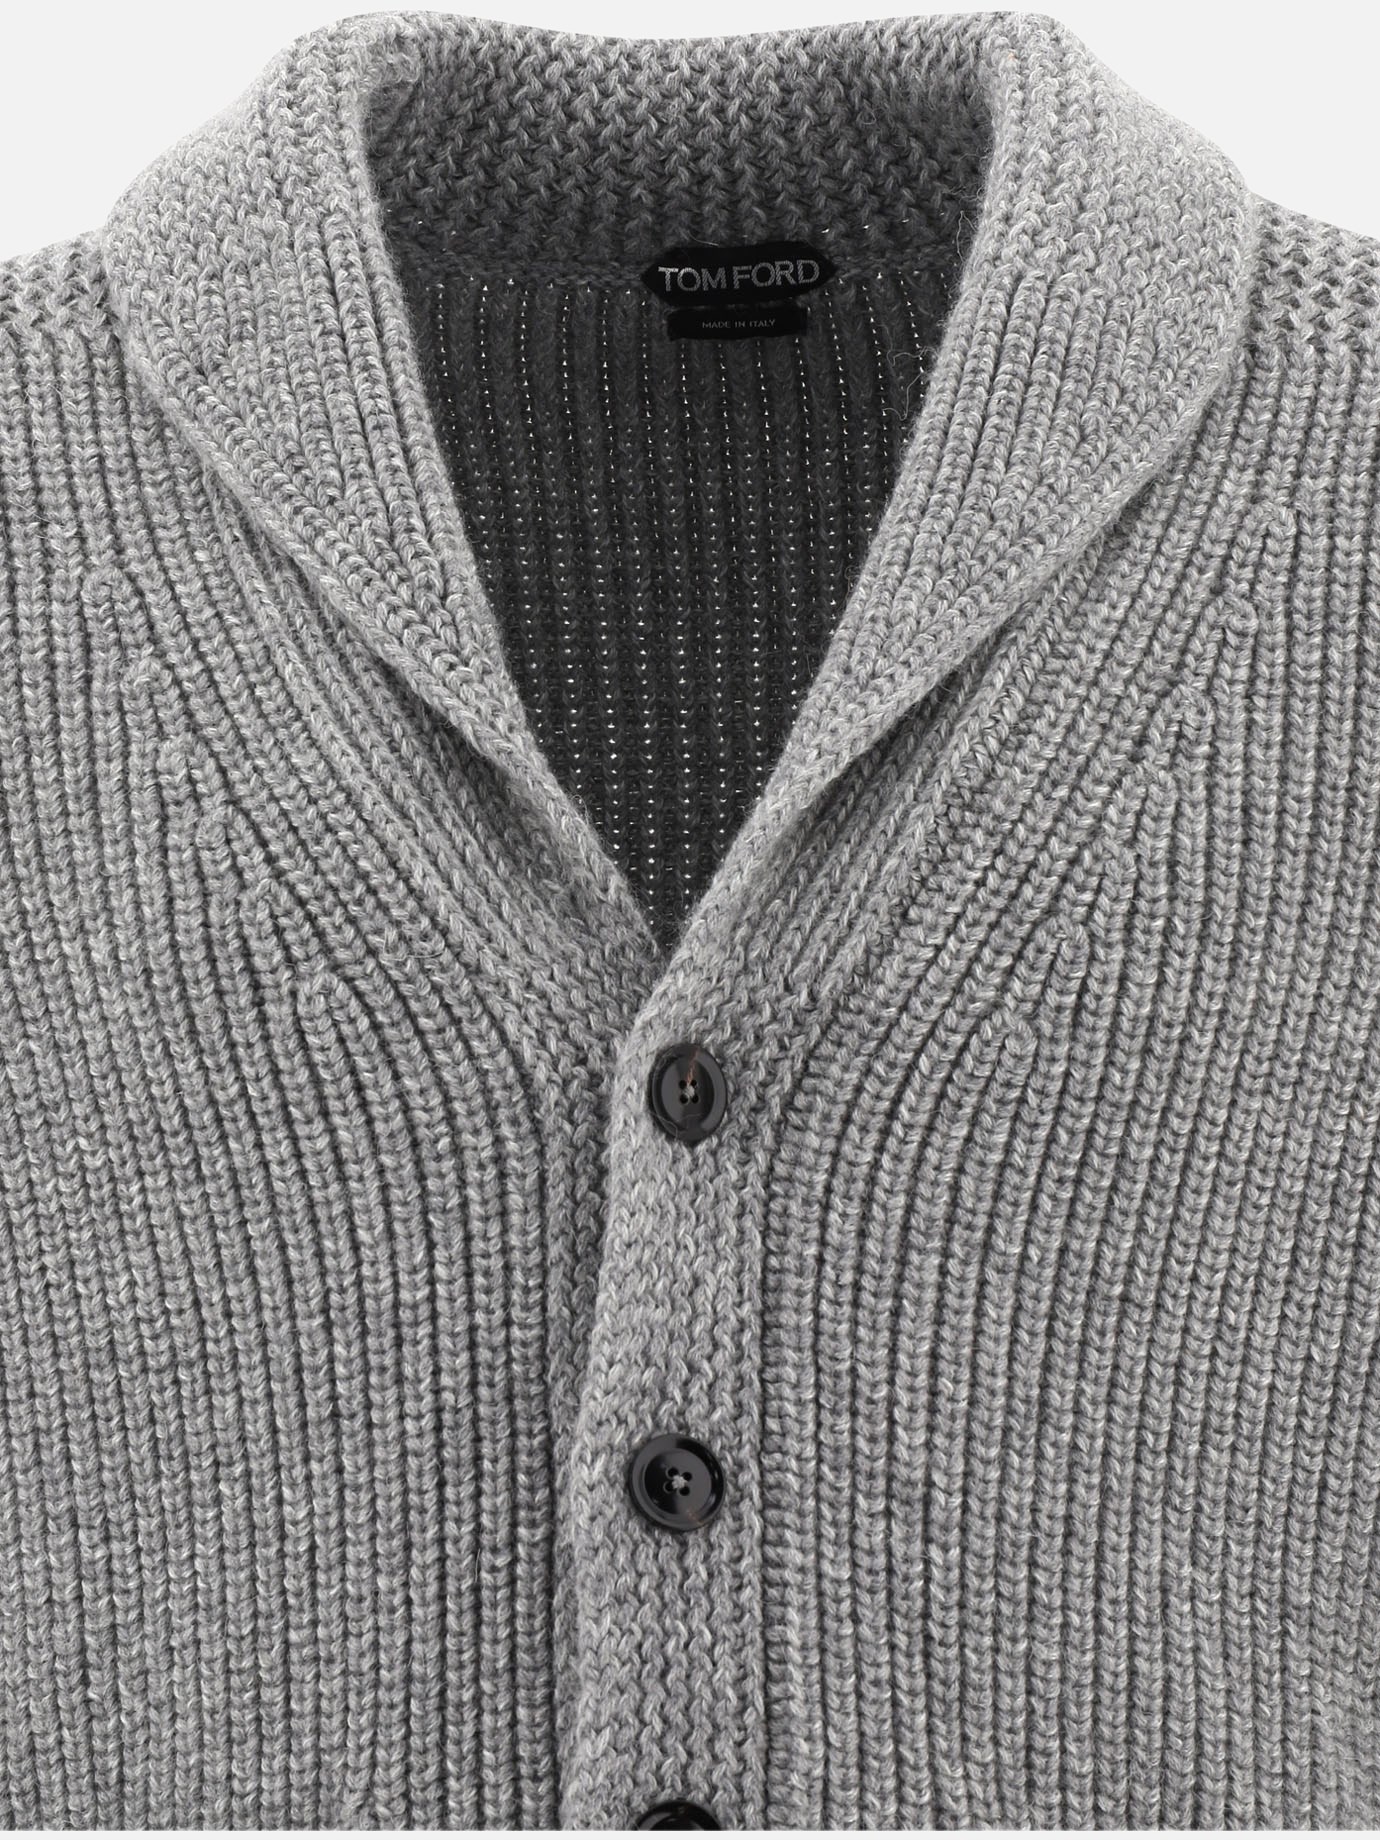 Tricot cardigan with pockets by Tom Ford